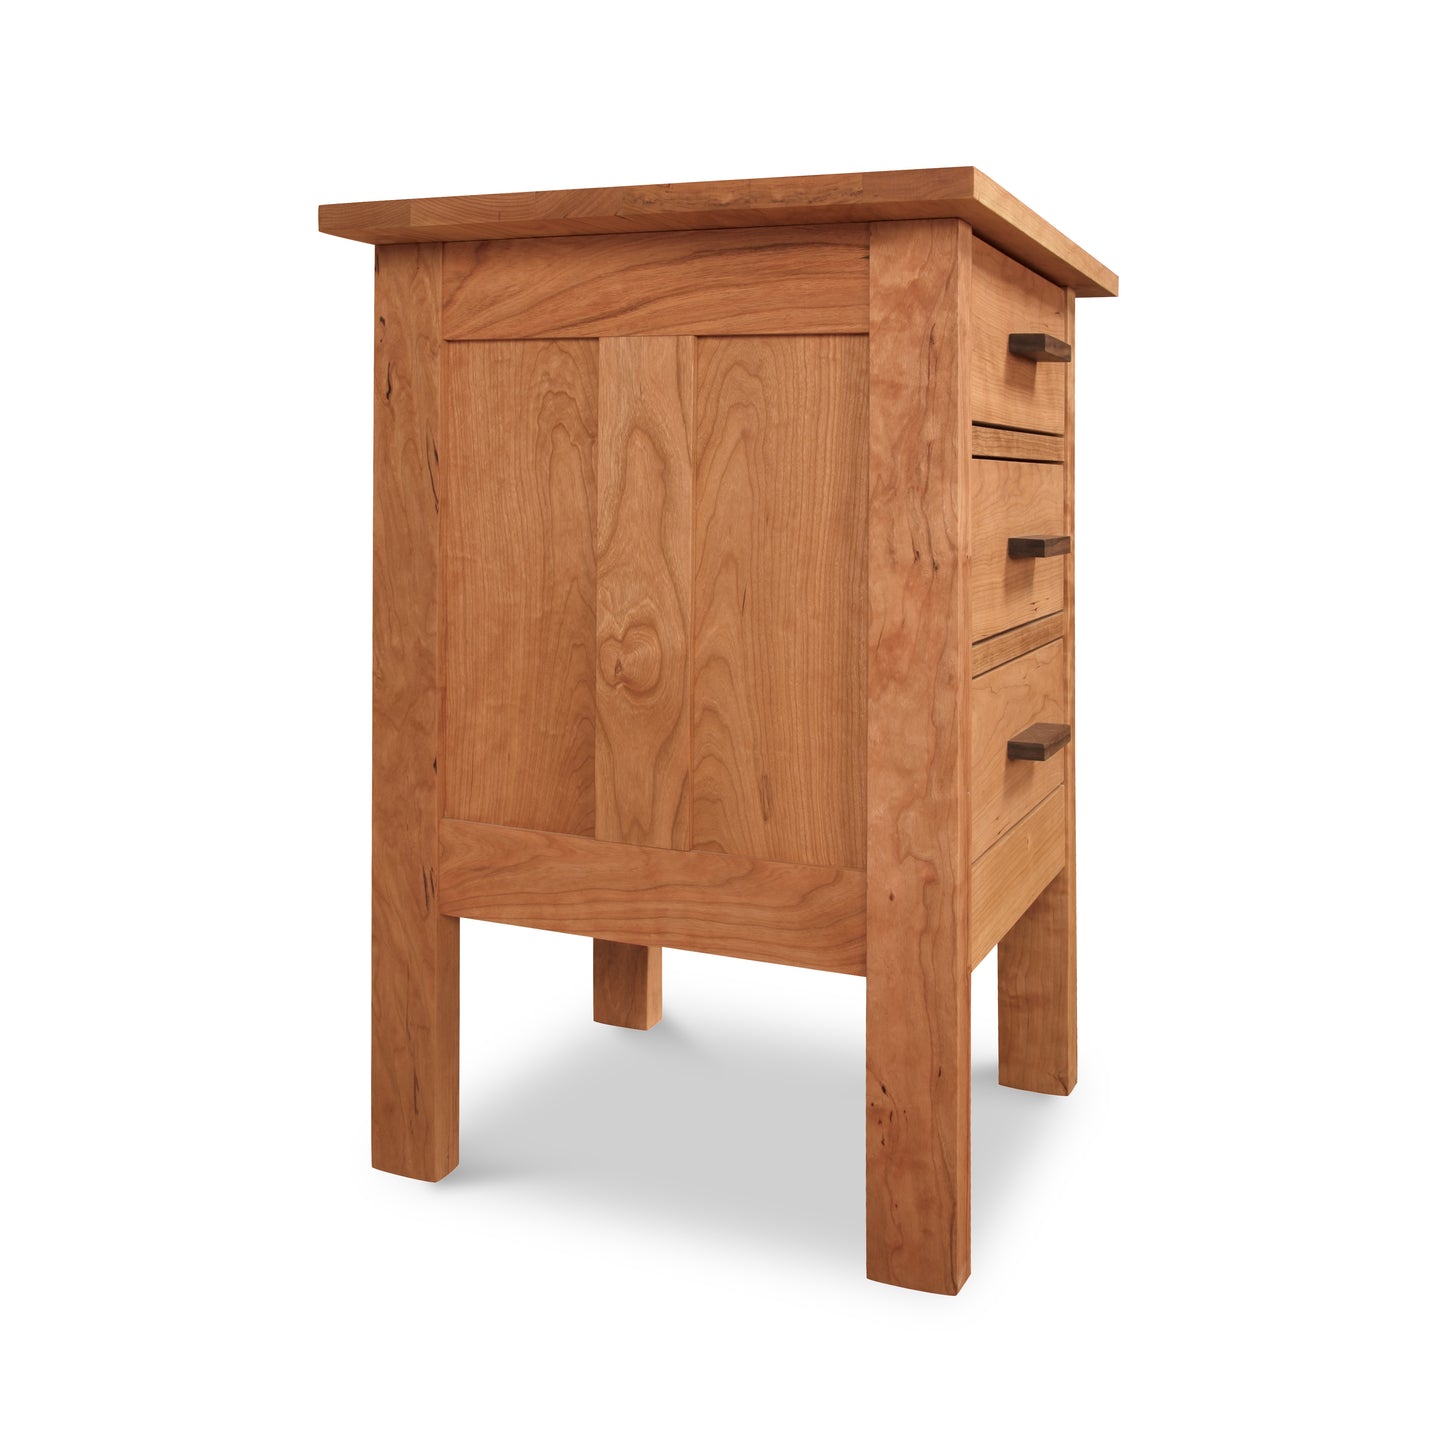 Wooden desk with a single cabinet door and a series of pull-out drawers on the right, isolated on a white background, echoing the Vermont Furniture Designs Modern Craftsman 3-Drawer Nightstand style.